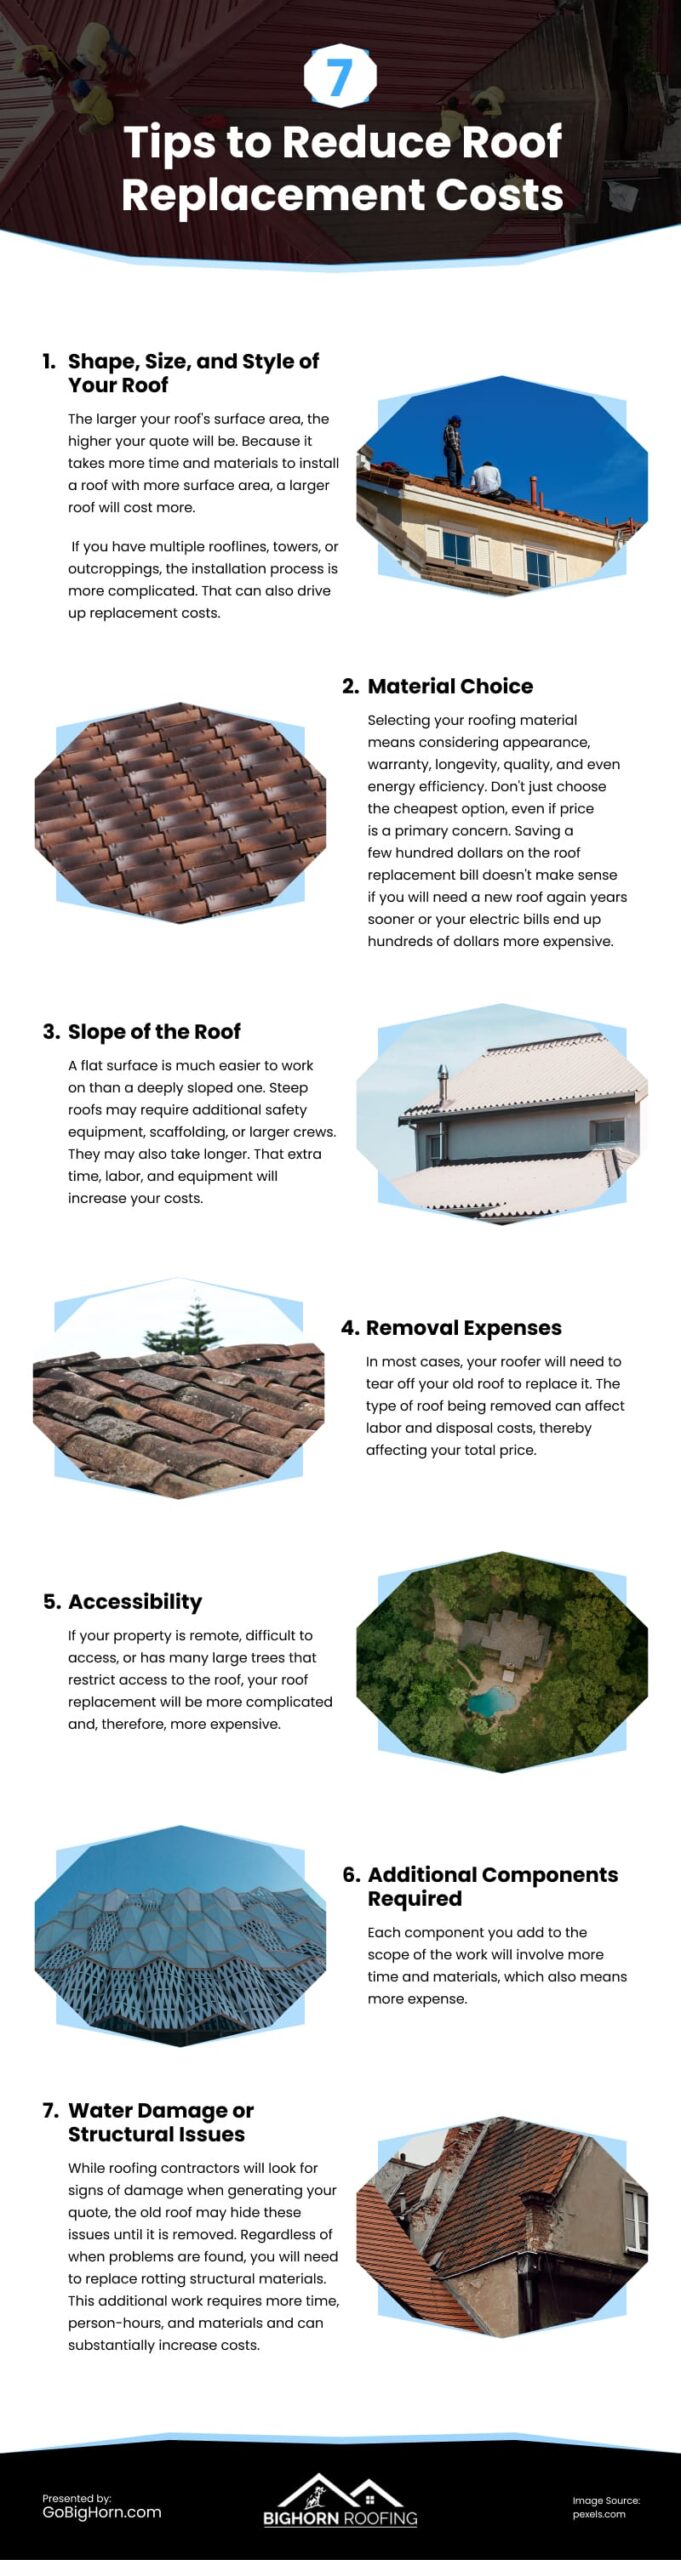 7 Tips to Reduce Roof Replacement Costs Infographic